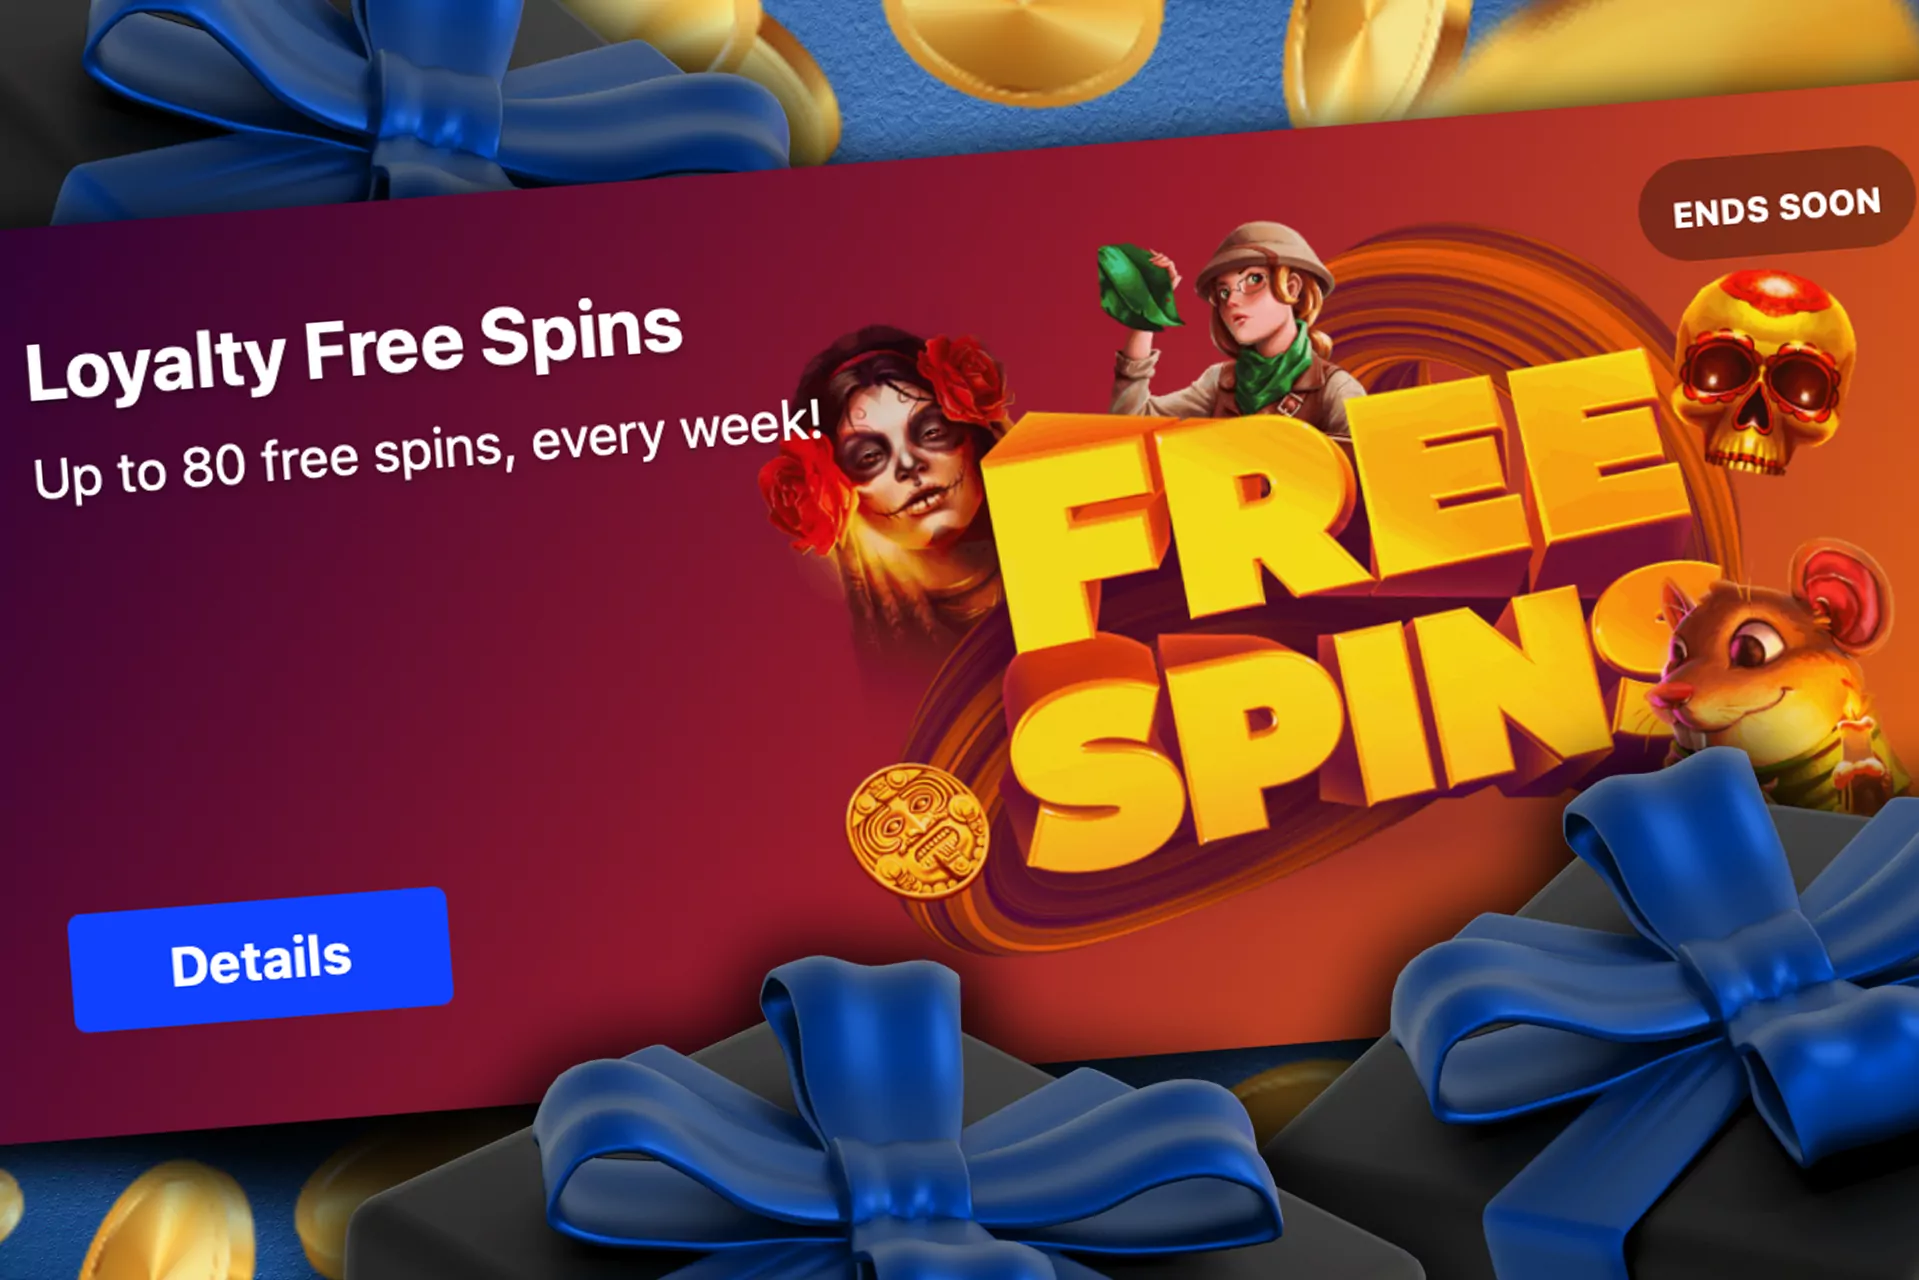 Receive free spins for online casino games.